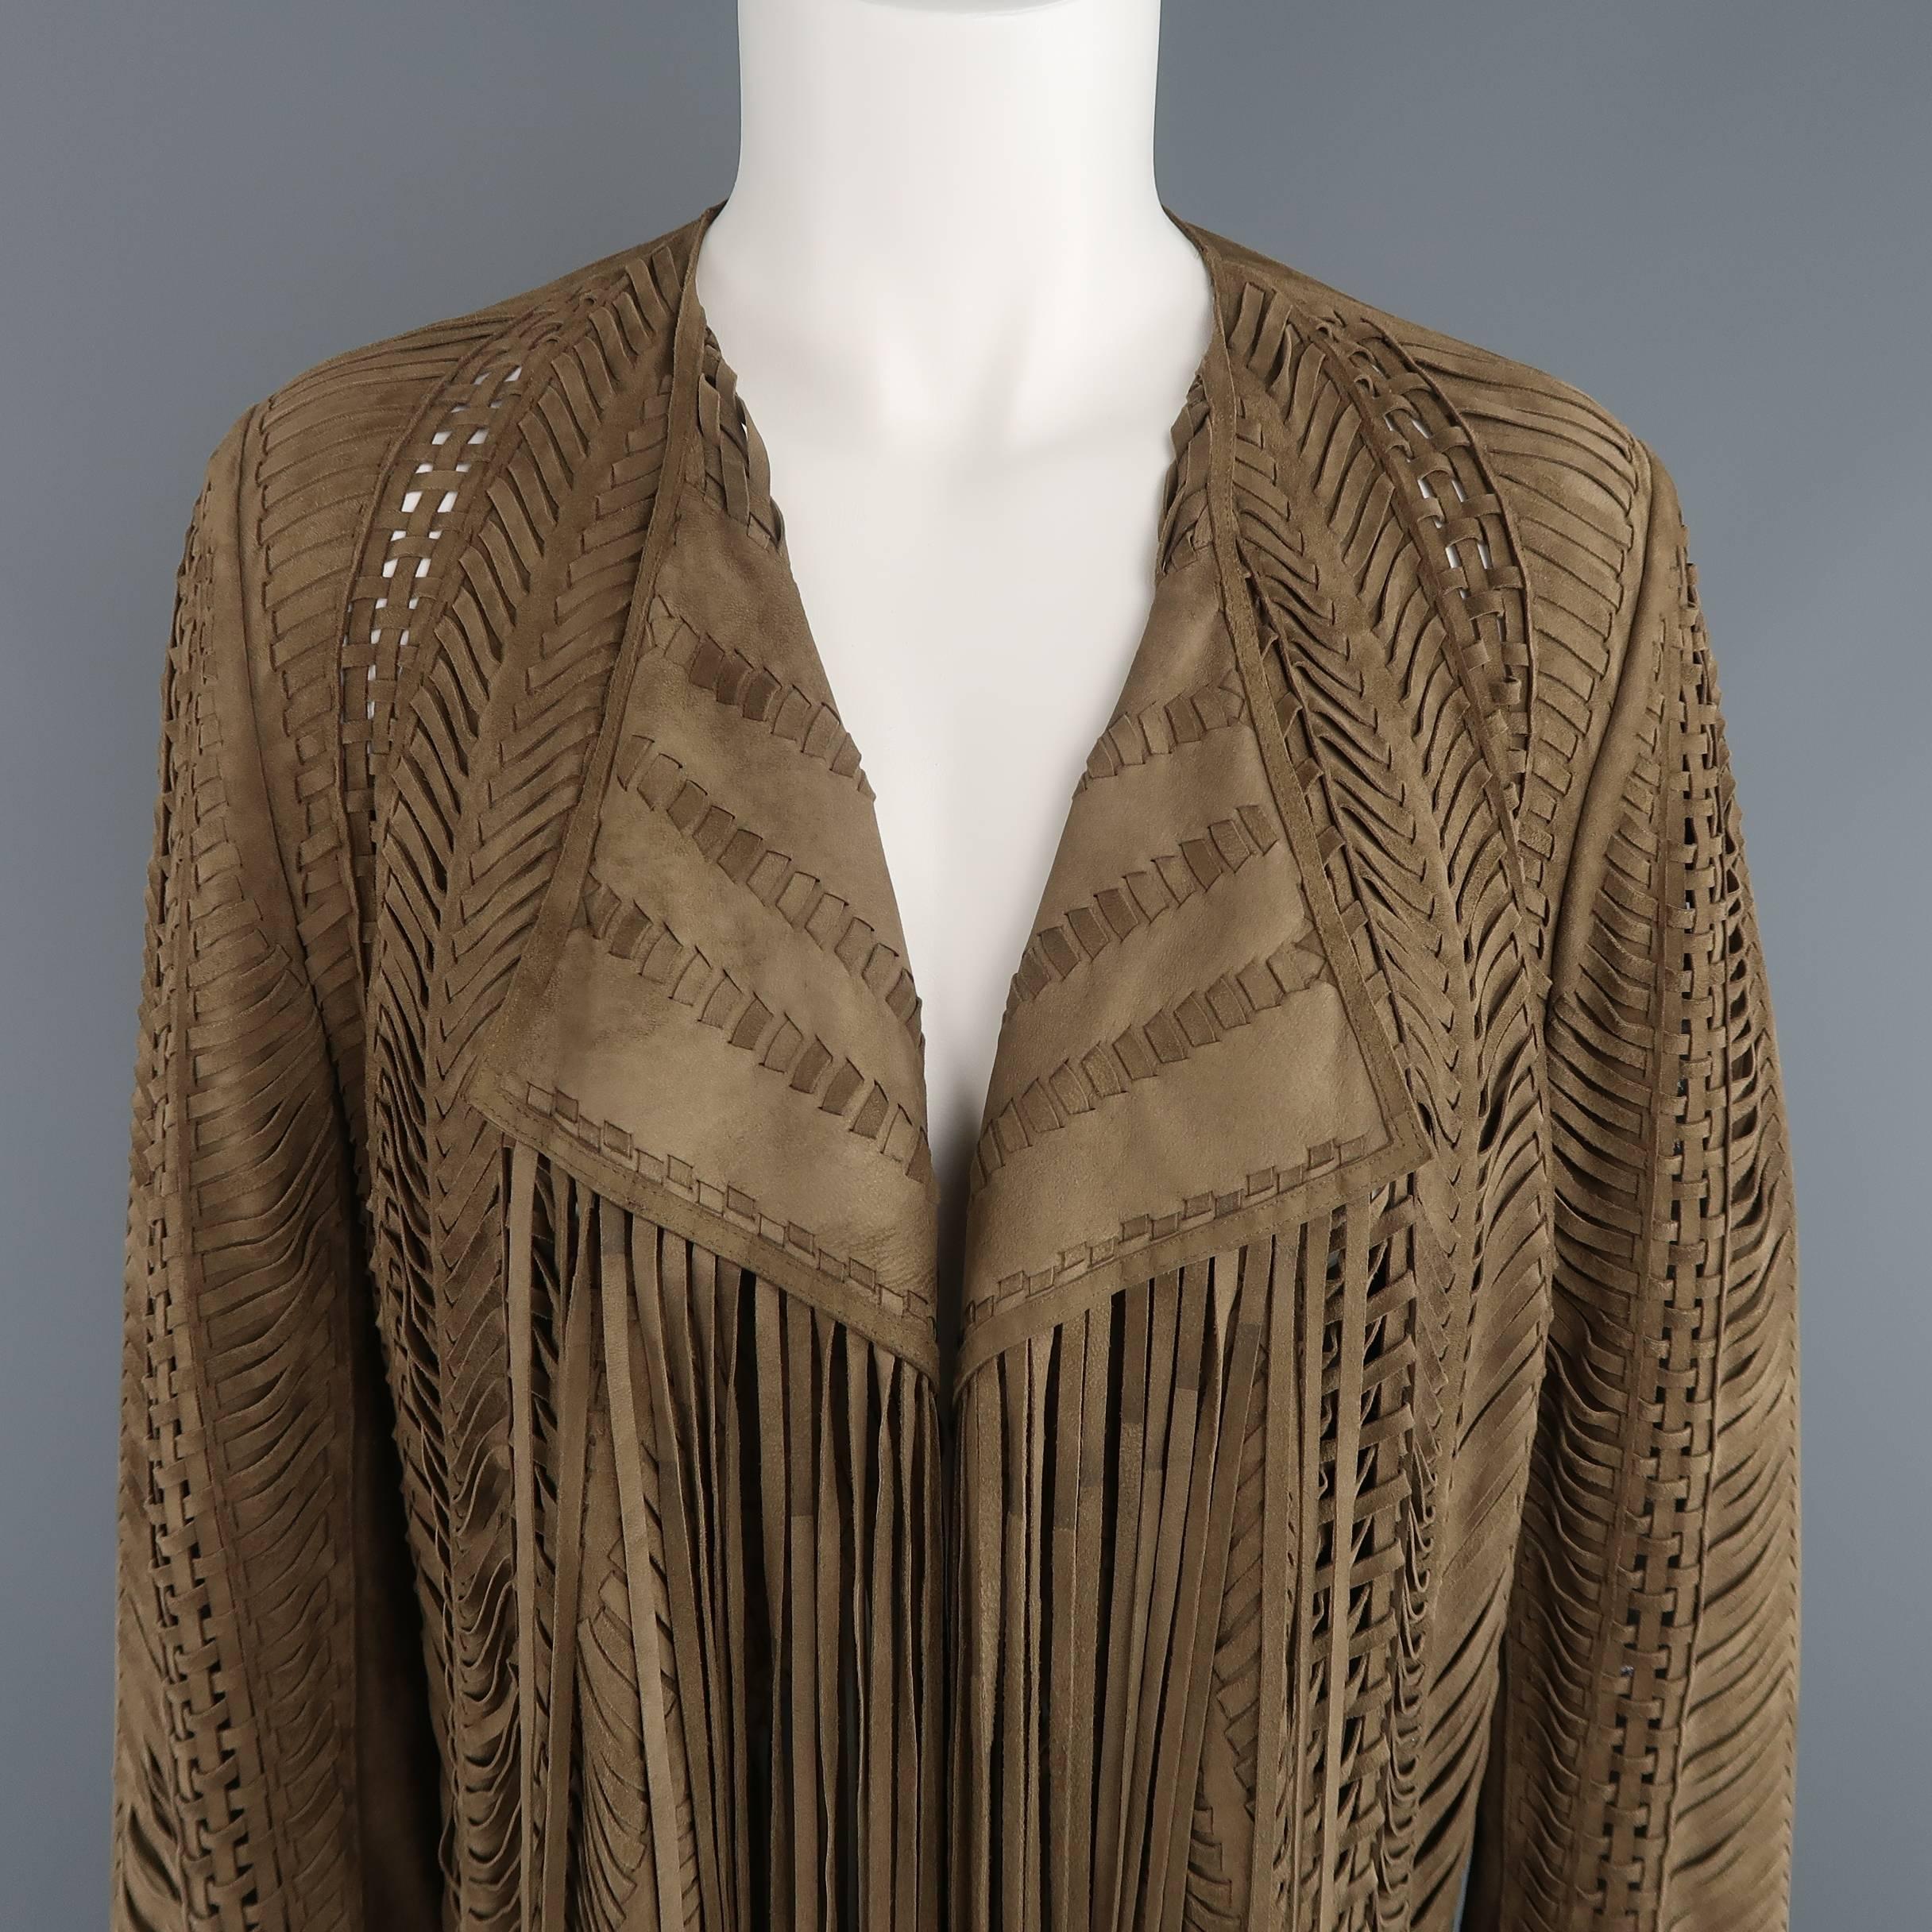 RALPH LAUREN COLLECTION jacket comes in an olive tone taupe suede and features an open front with pointed lapel, woven pattern construction, and long extended fringe. Made in Italy.

Retails at: $4500.00
Excellent Pre-Owned Condition.
Marked: 6
